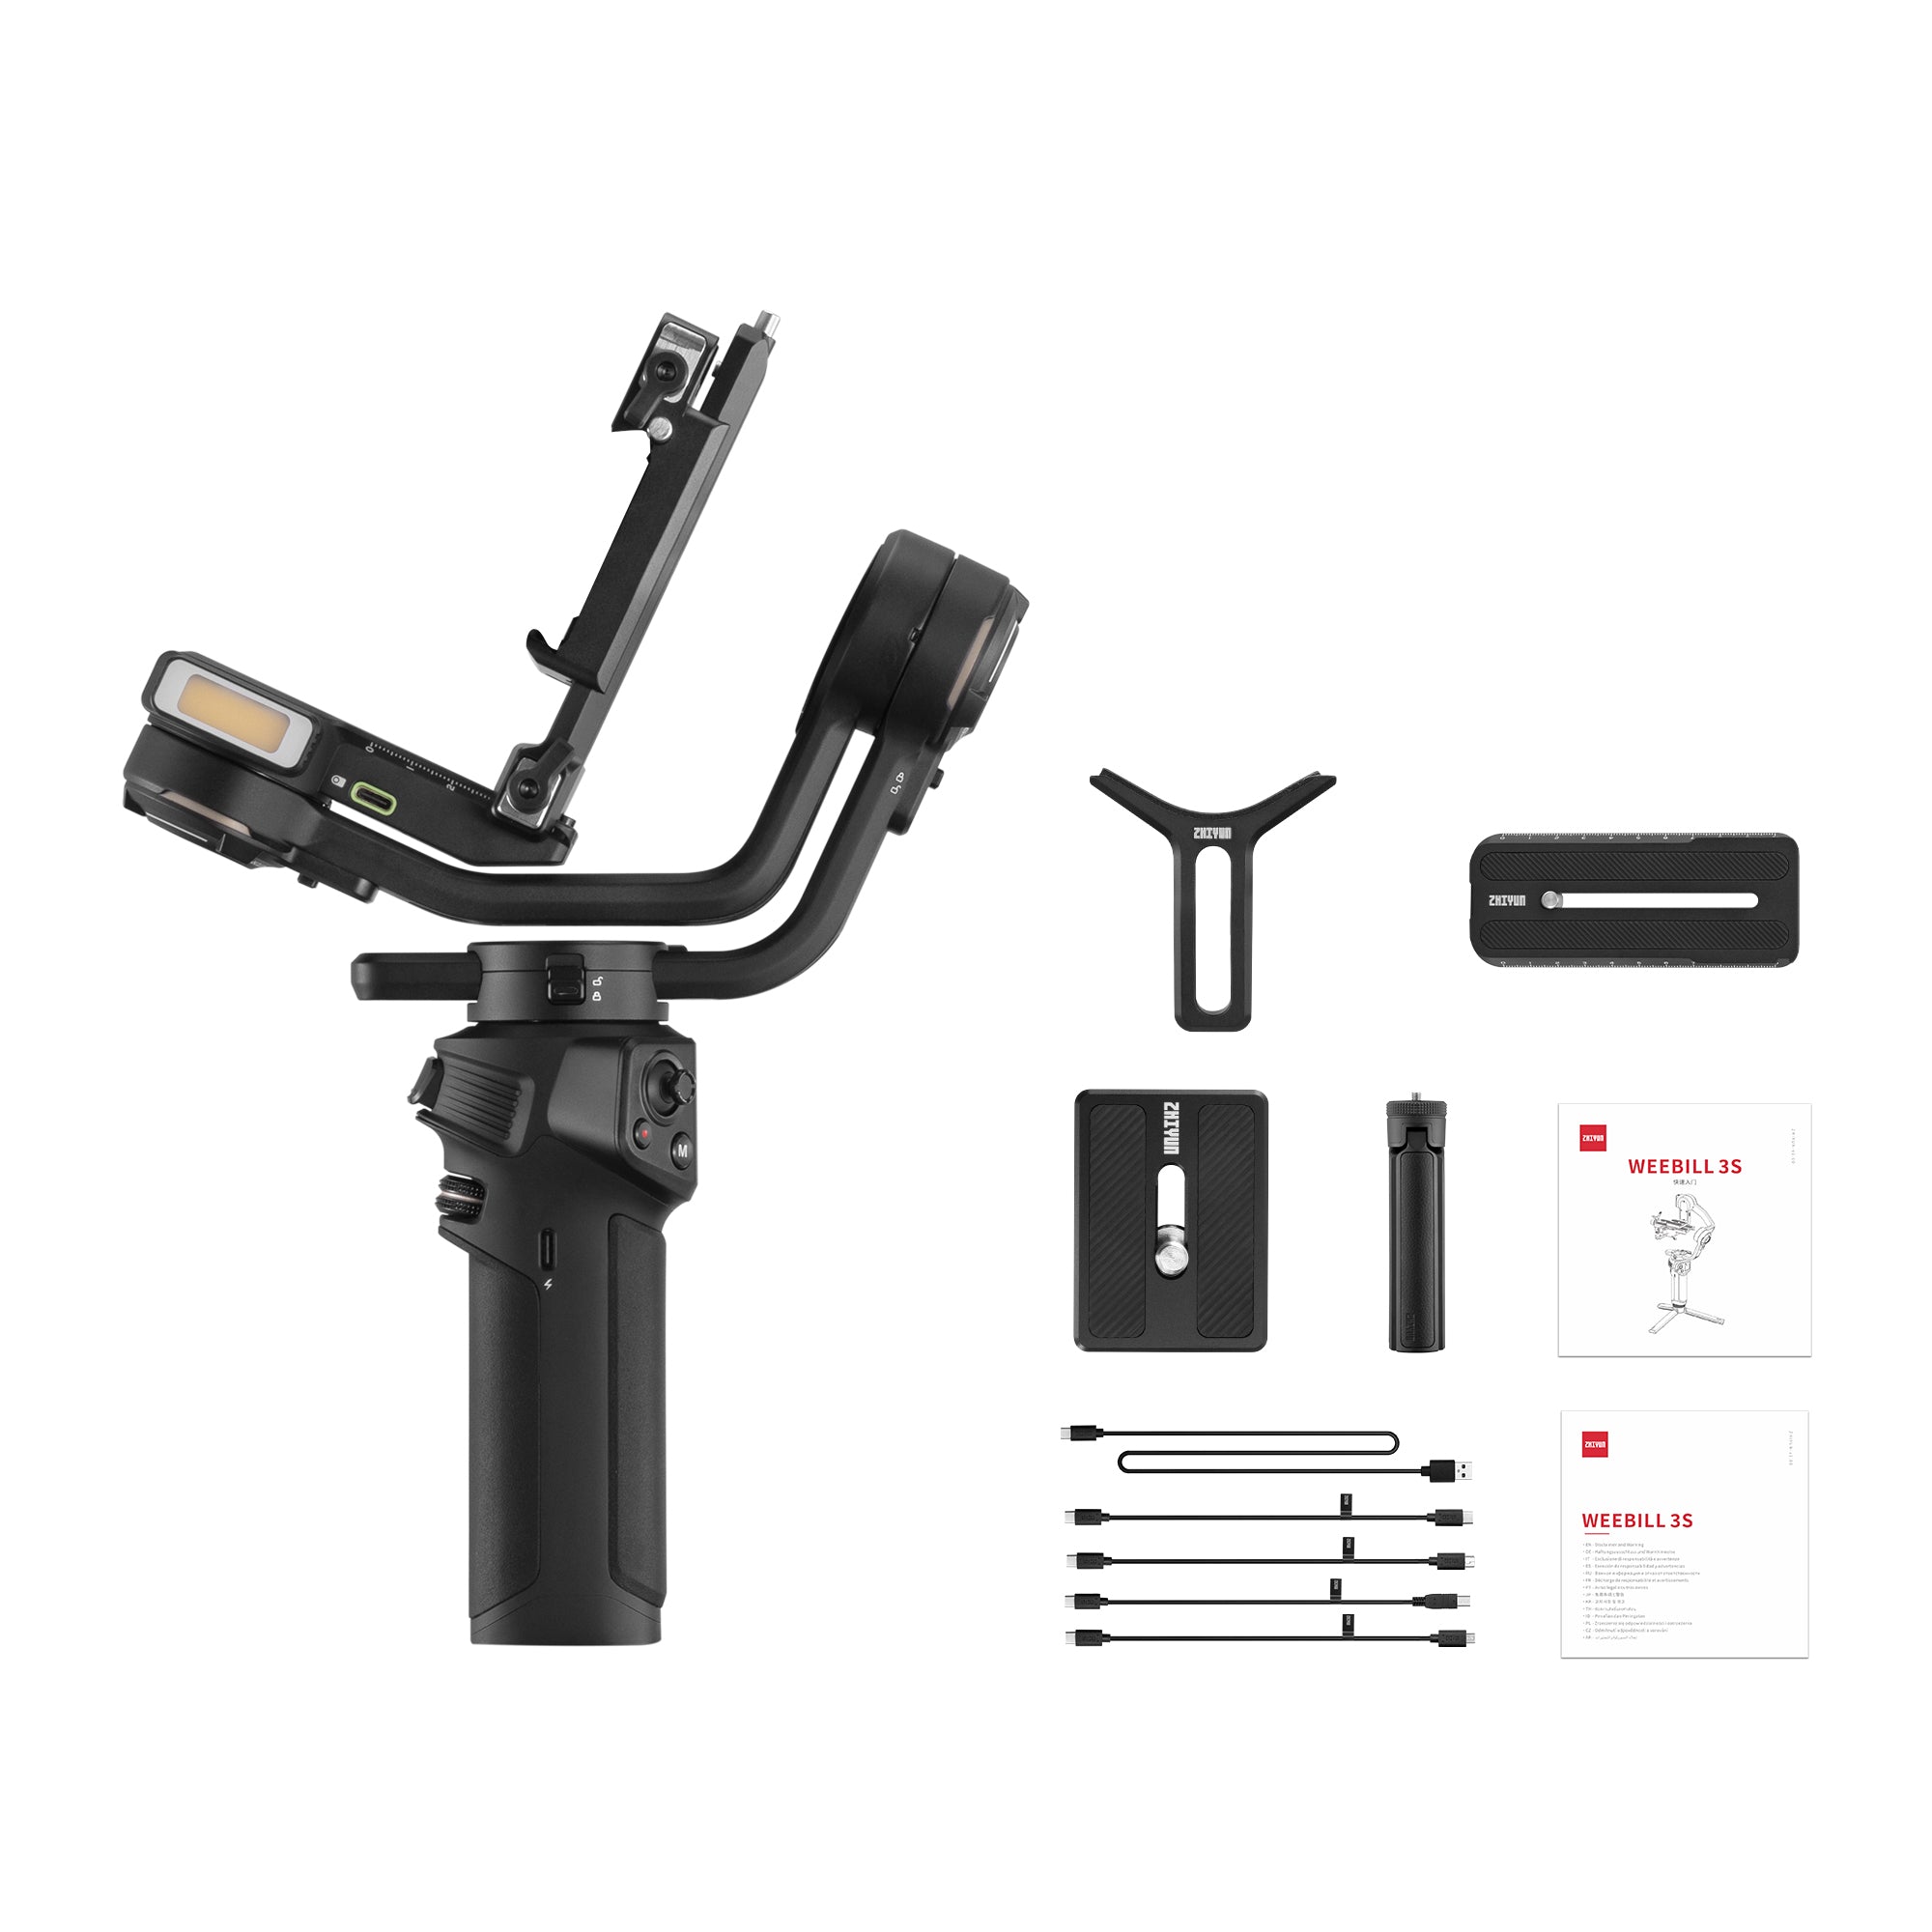 Weebill 3S - Gimbal Stabilizer for DSLR and Mirrorless Camera 